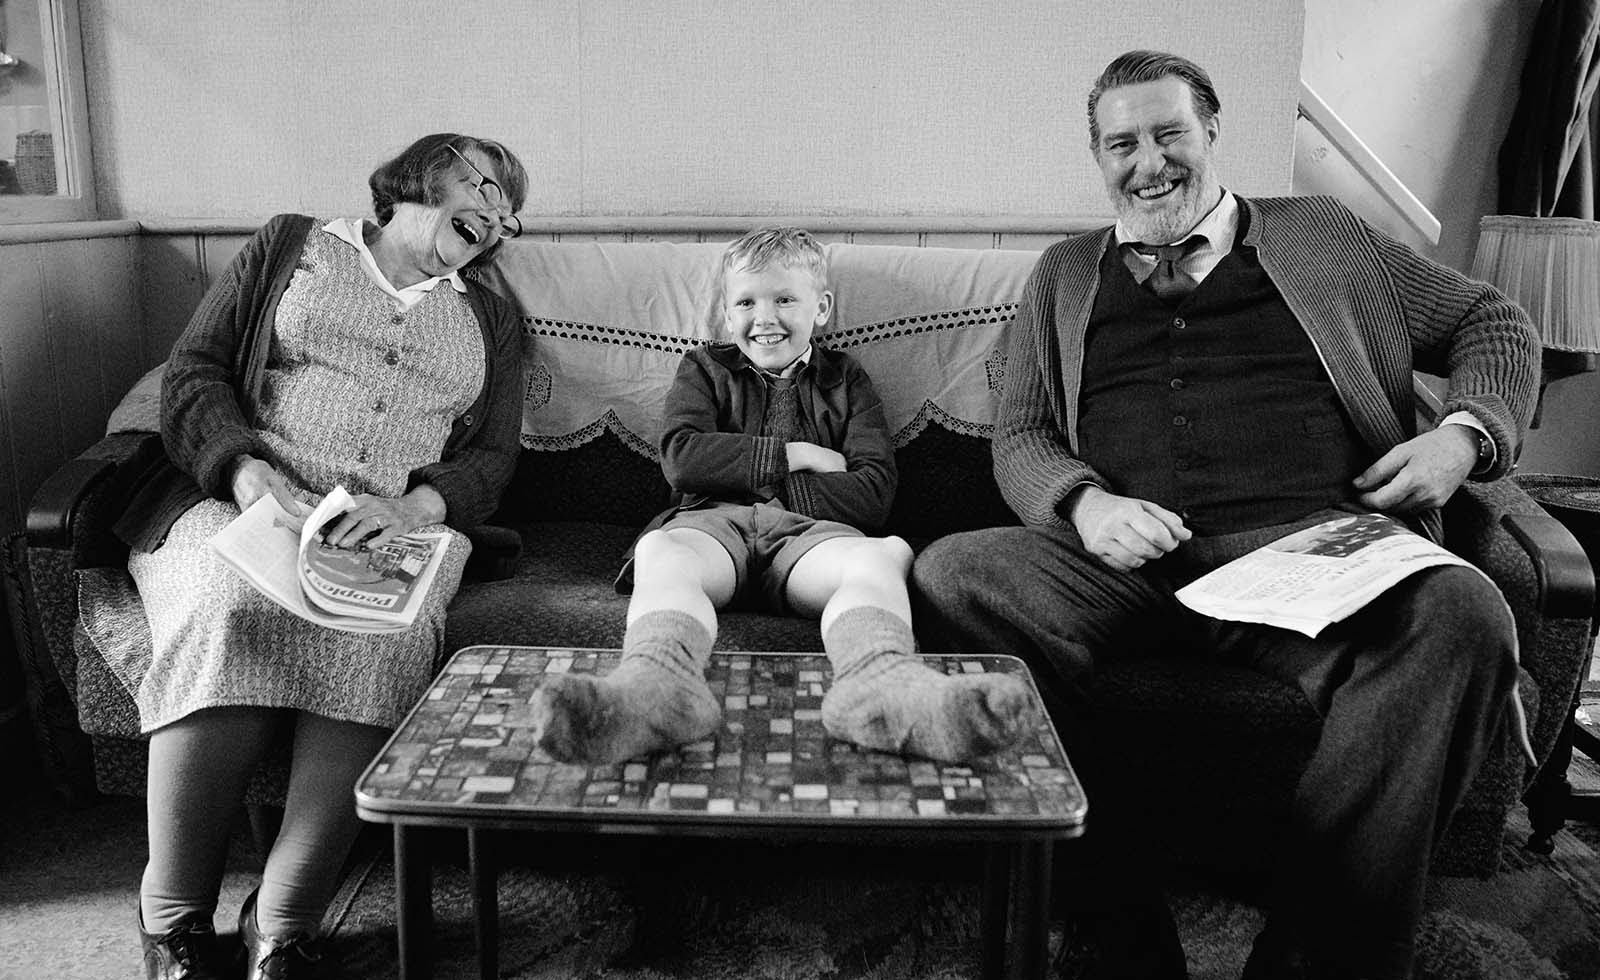 Judi Dench, Jude Hill, and Ciarán Hinds share a laugh between takes.